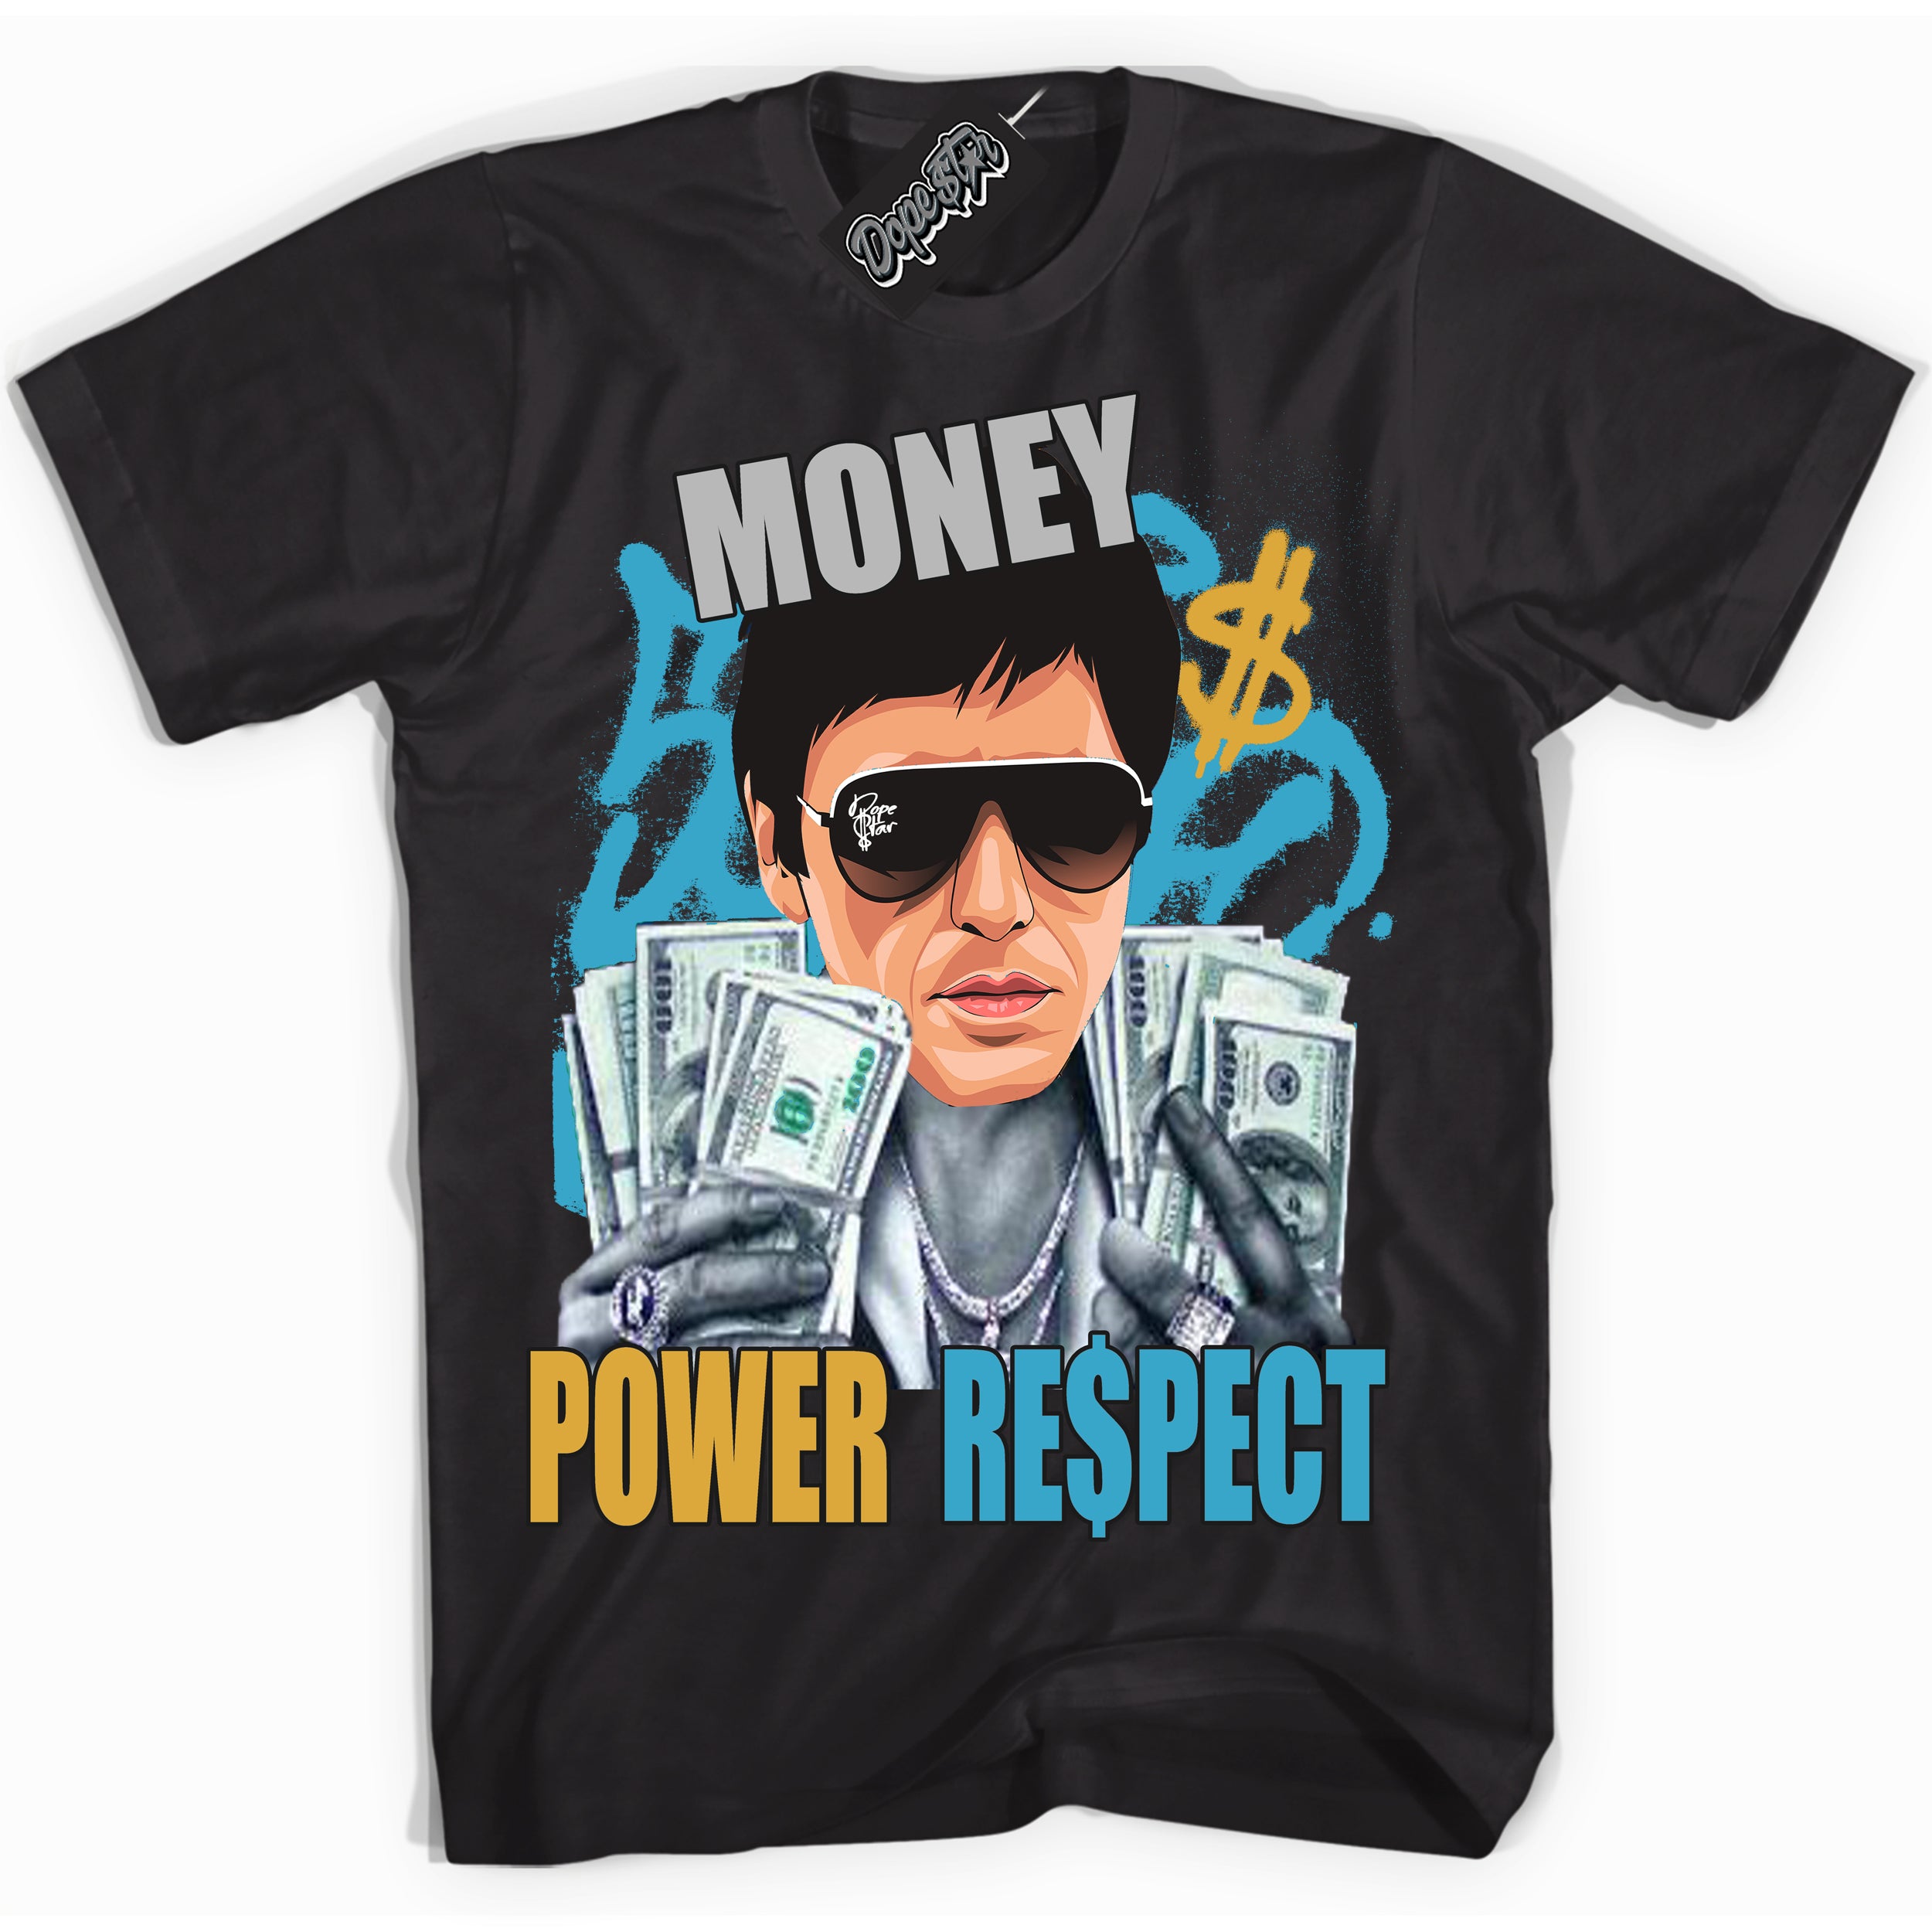 Cool Black Shirt with “ Tony Montana” design that perfectly matches Aqua 5s Sneakers.